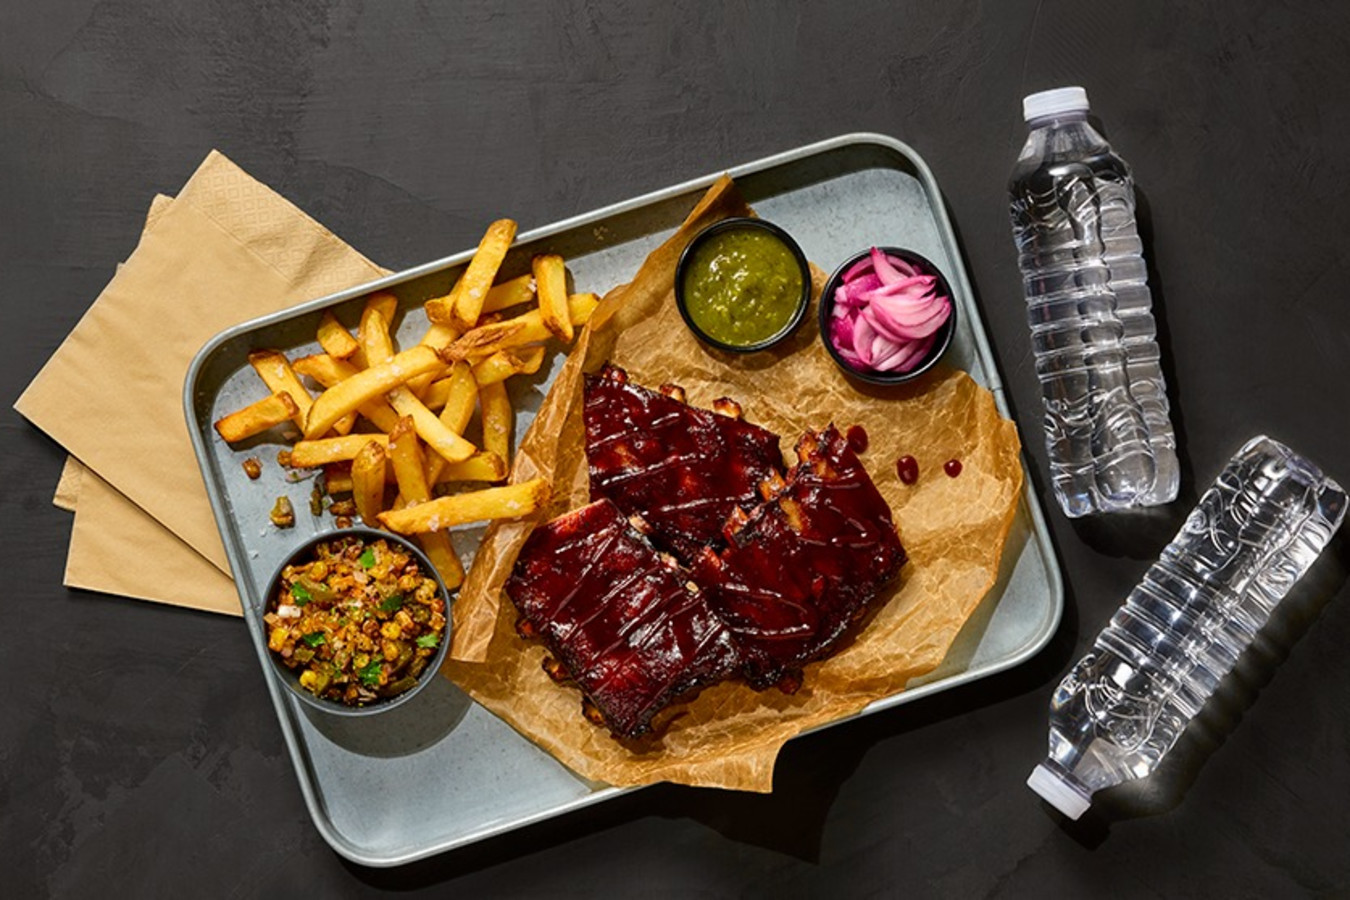 sweet-chipotle-glazed-ribs-with-french-fries-pickled-onion-charred-corn-and